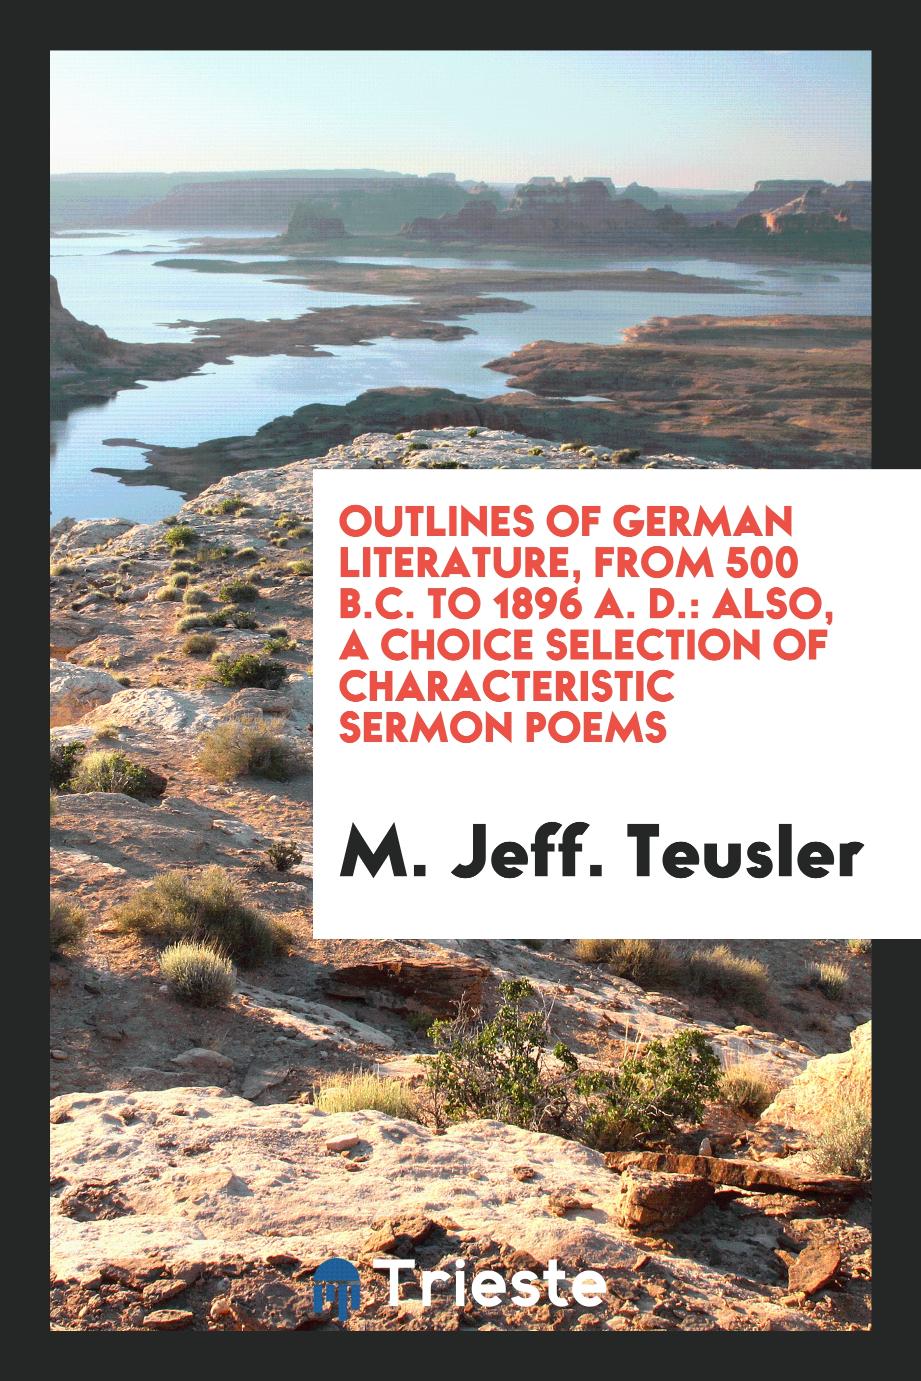 Outlines of German Literature, from 500 B.C. To 1896 A. D.: Also, a Choice Selection of Characteristic Sermon Poems